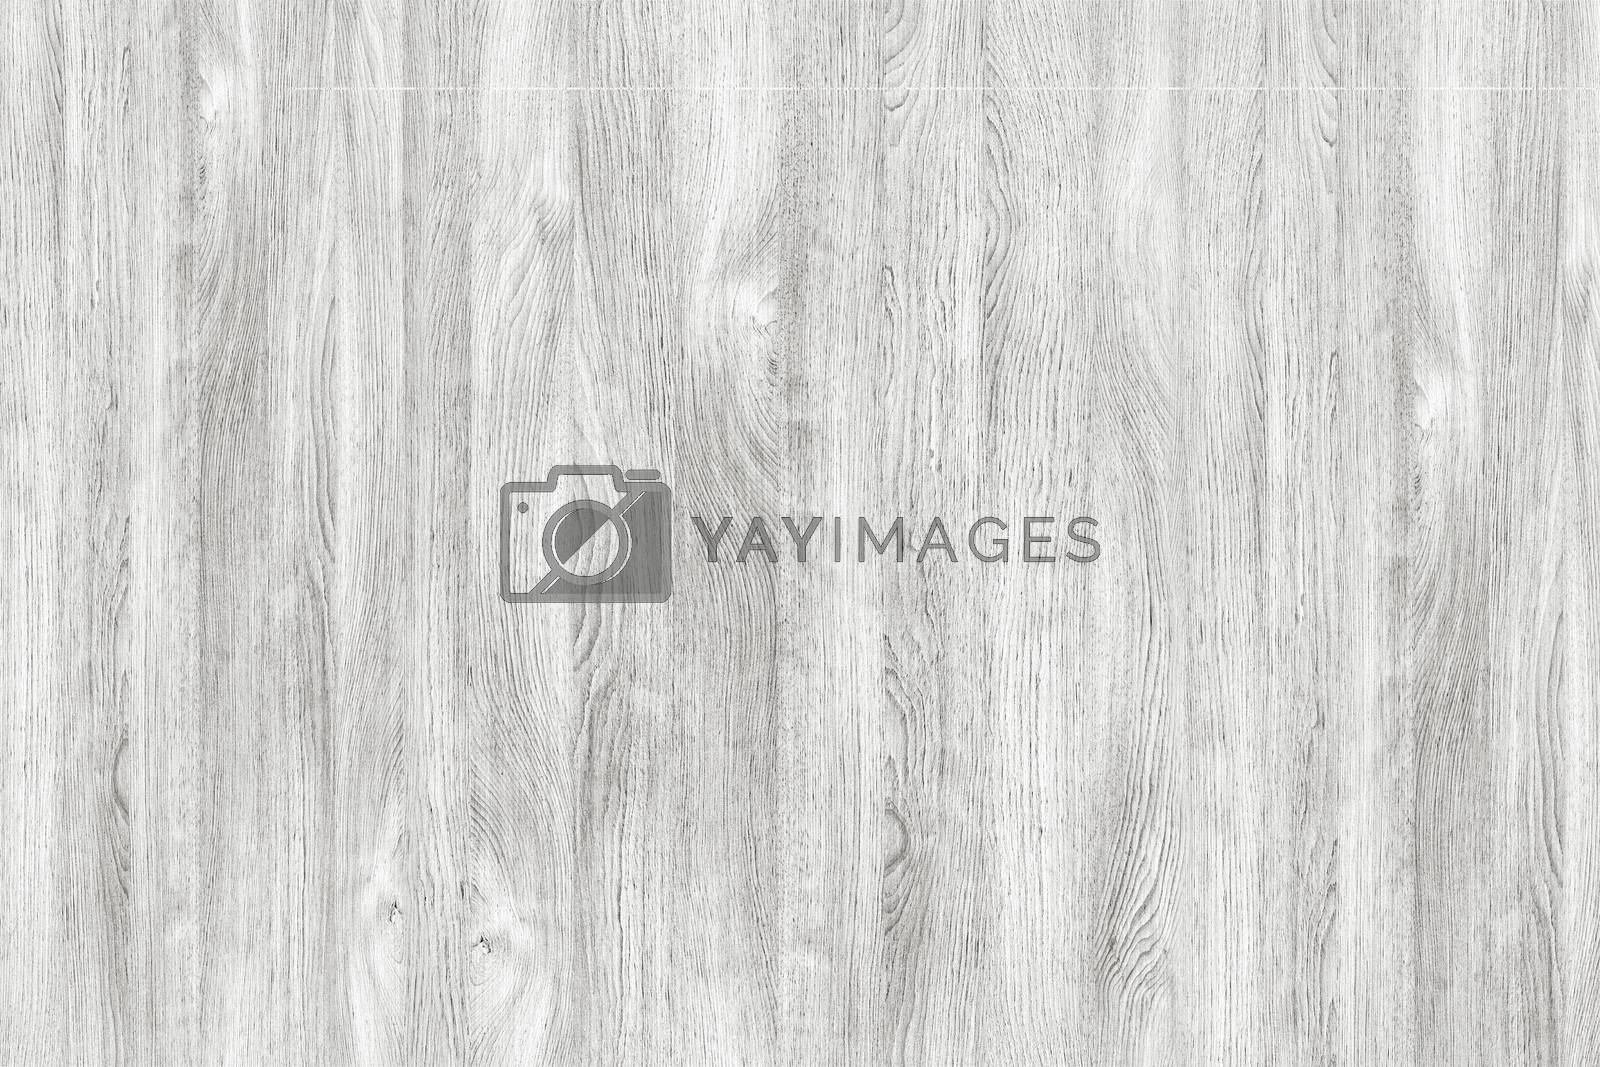 Royalty free image of Wood texture with natural patterns, white washed wooden texture. by ivo_13